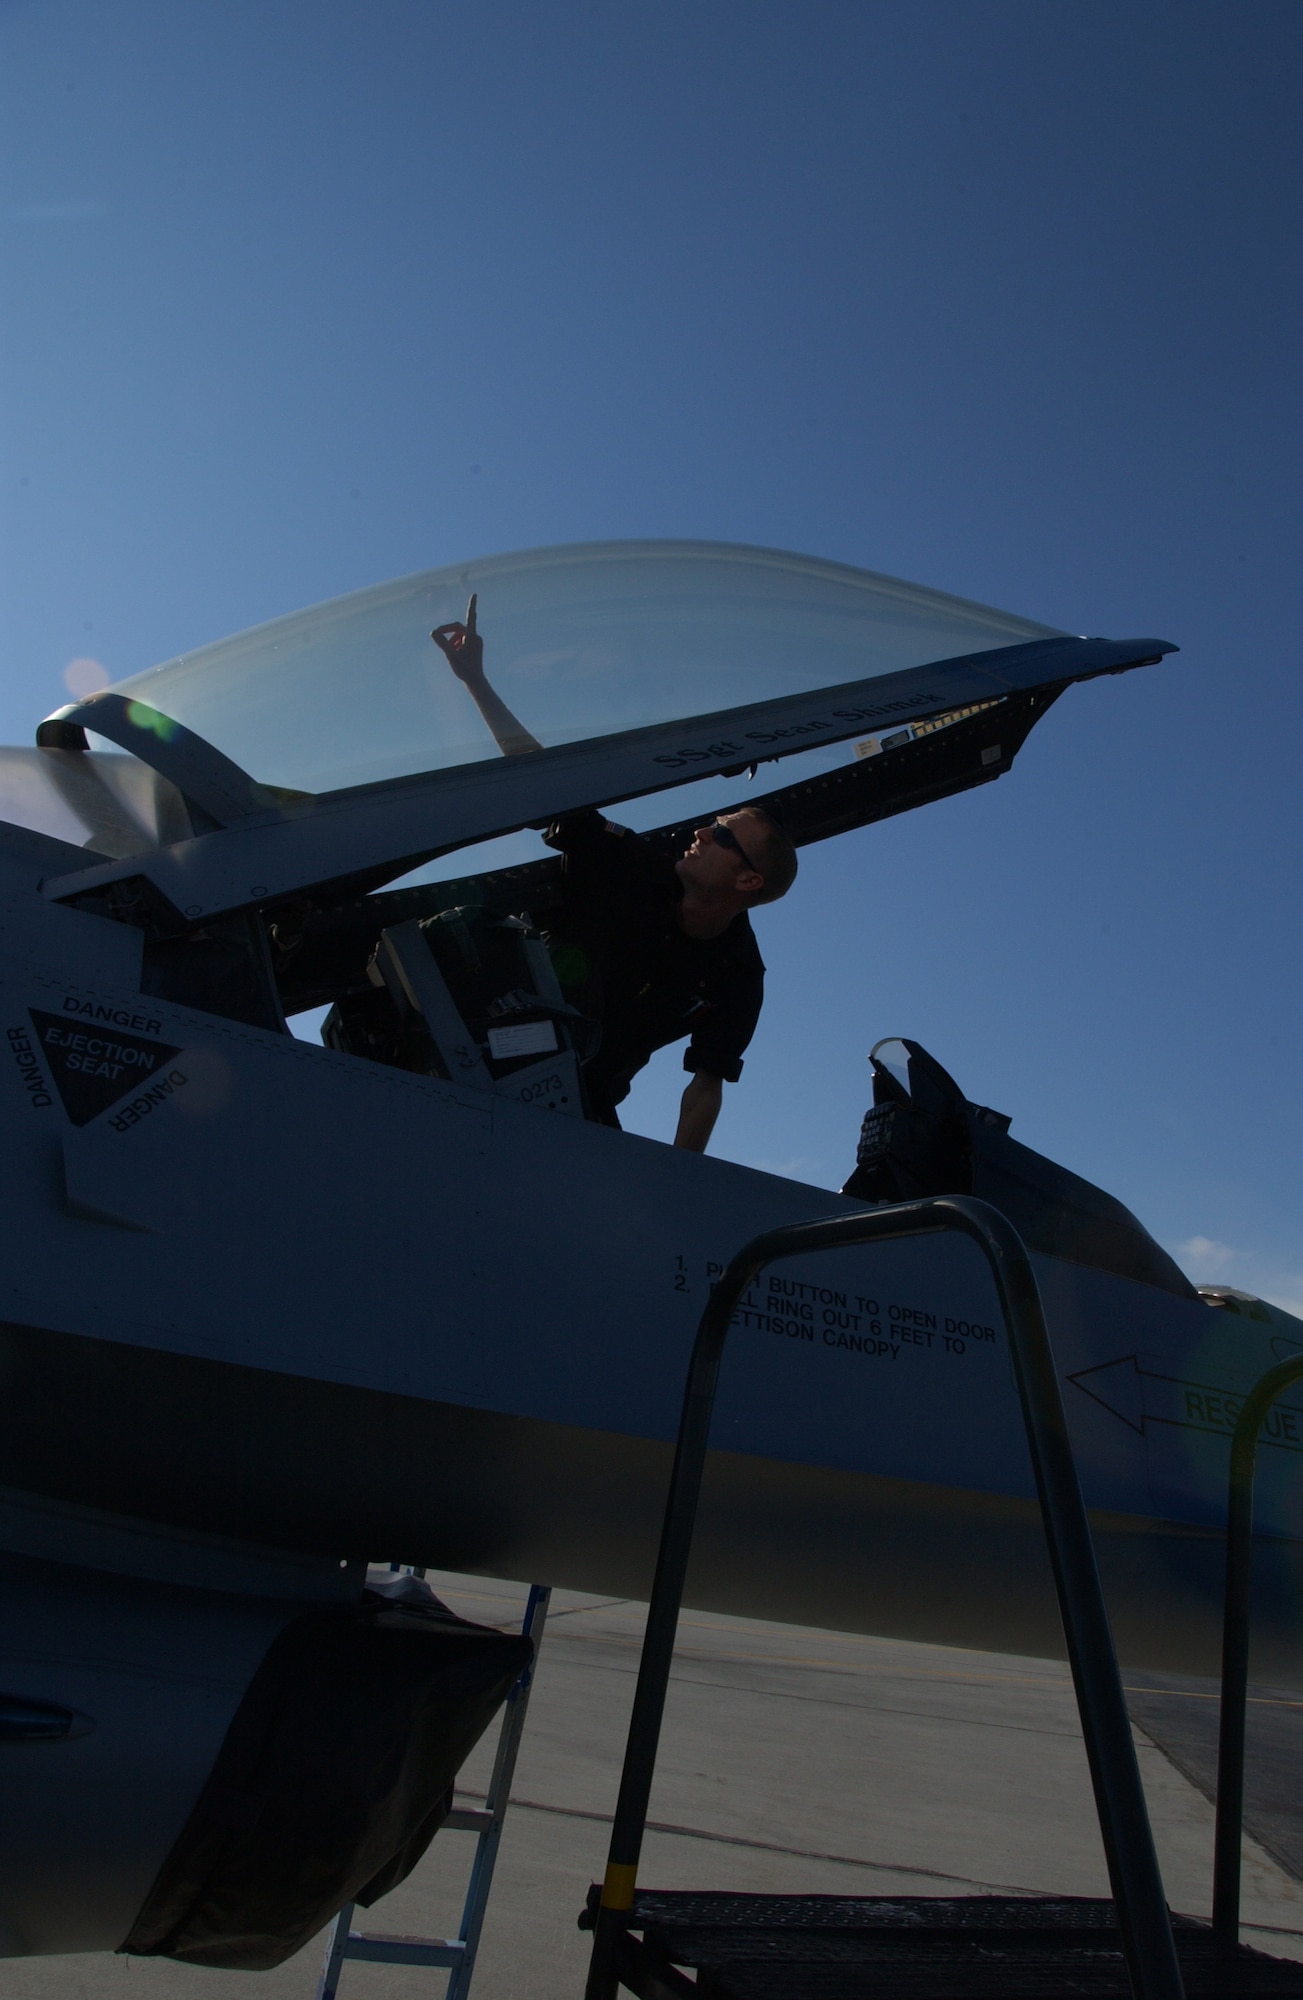 EIELSON AIR FORCE BASE, Alaska --Senior Airman Jed Winkelman, 64th Aggressor Squadron, Nellis Air Force Base, Nev., inspects the canopy of an F-16 to assure it is clean June 8. Airman Winkelman is one of many crew chiefs from around the Air Force who came to participate in Red Flag 07-02, which ends June 15.  (U.S. Air Force photo by Airman 1st Class Christopher Griffin)